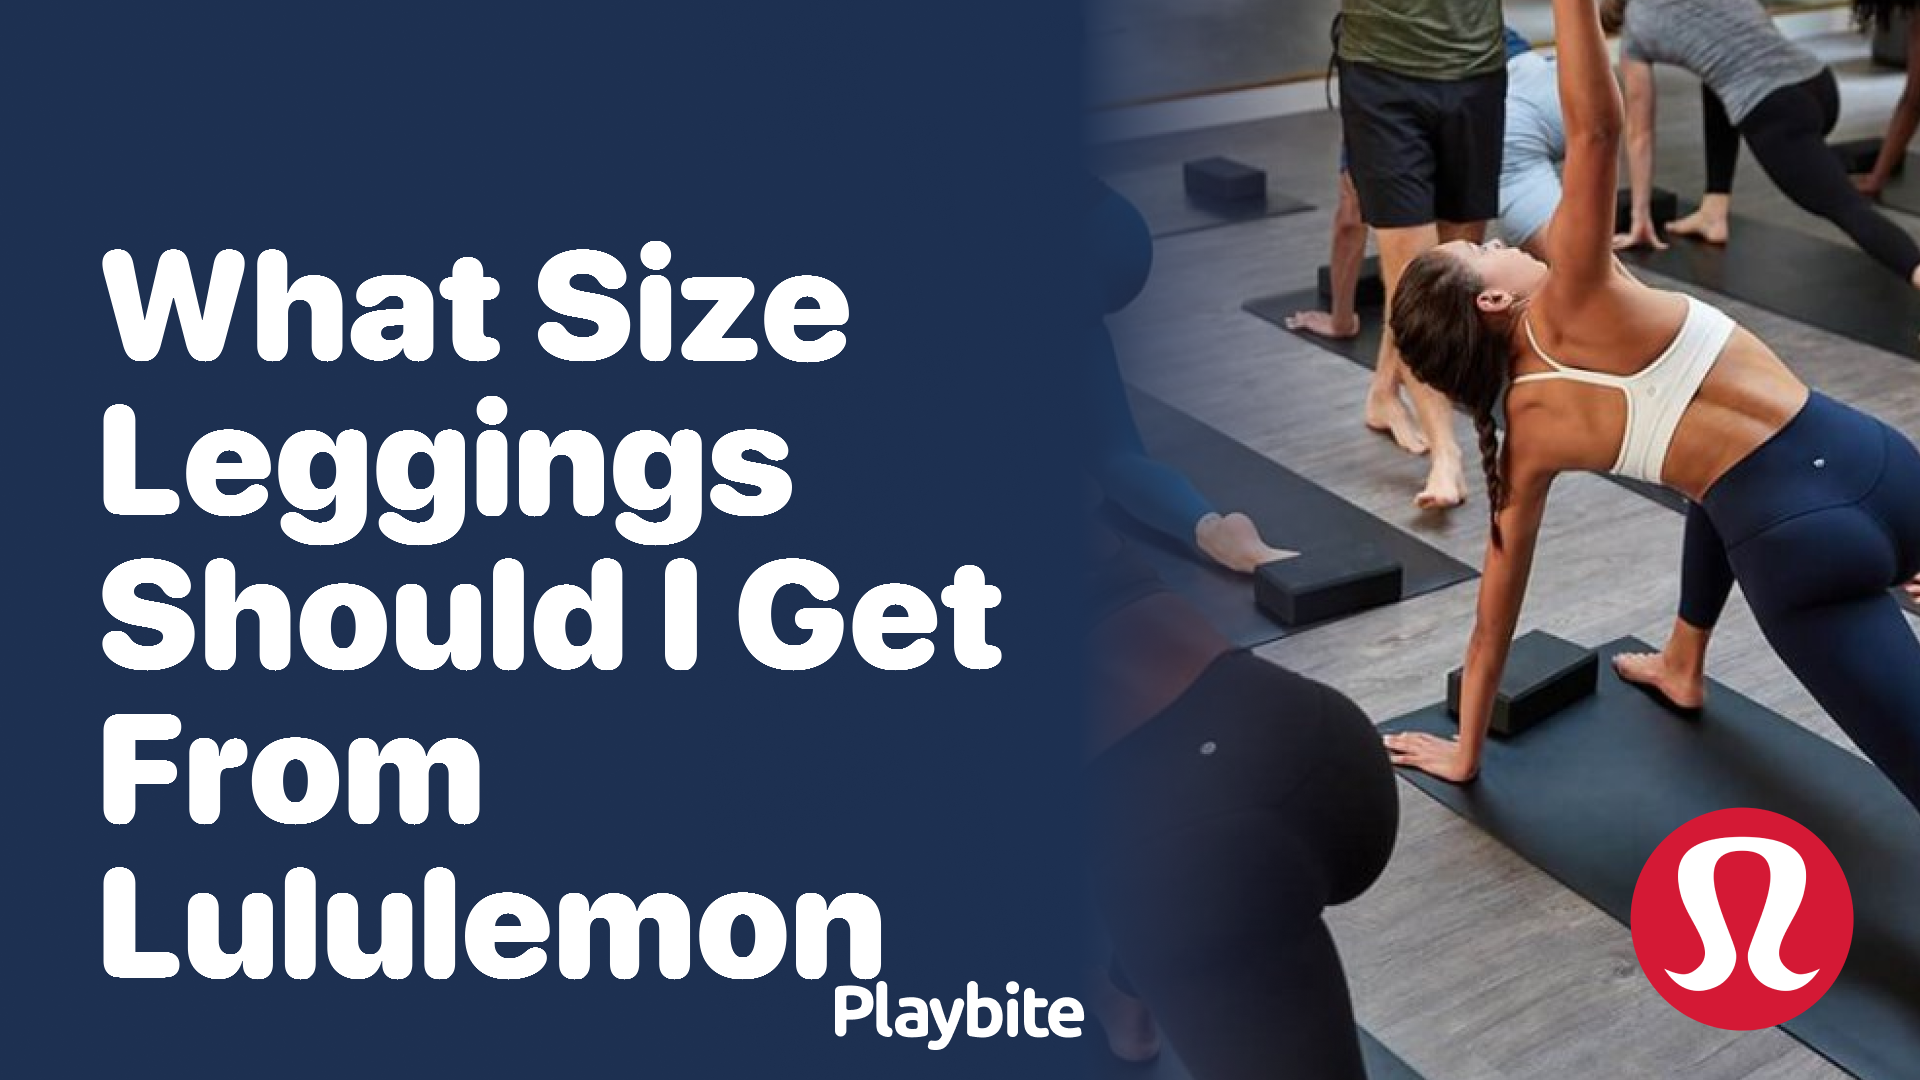 How Long Are Lululemon Yoga Mats? Getting the Right Size for Your